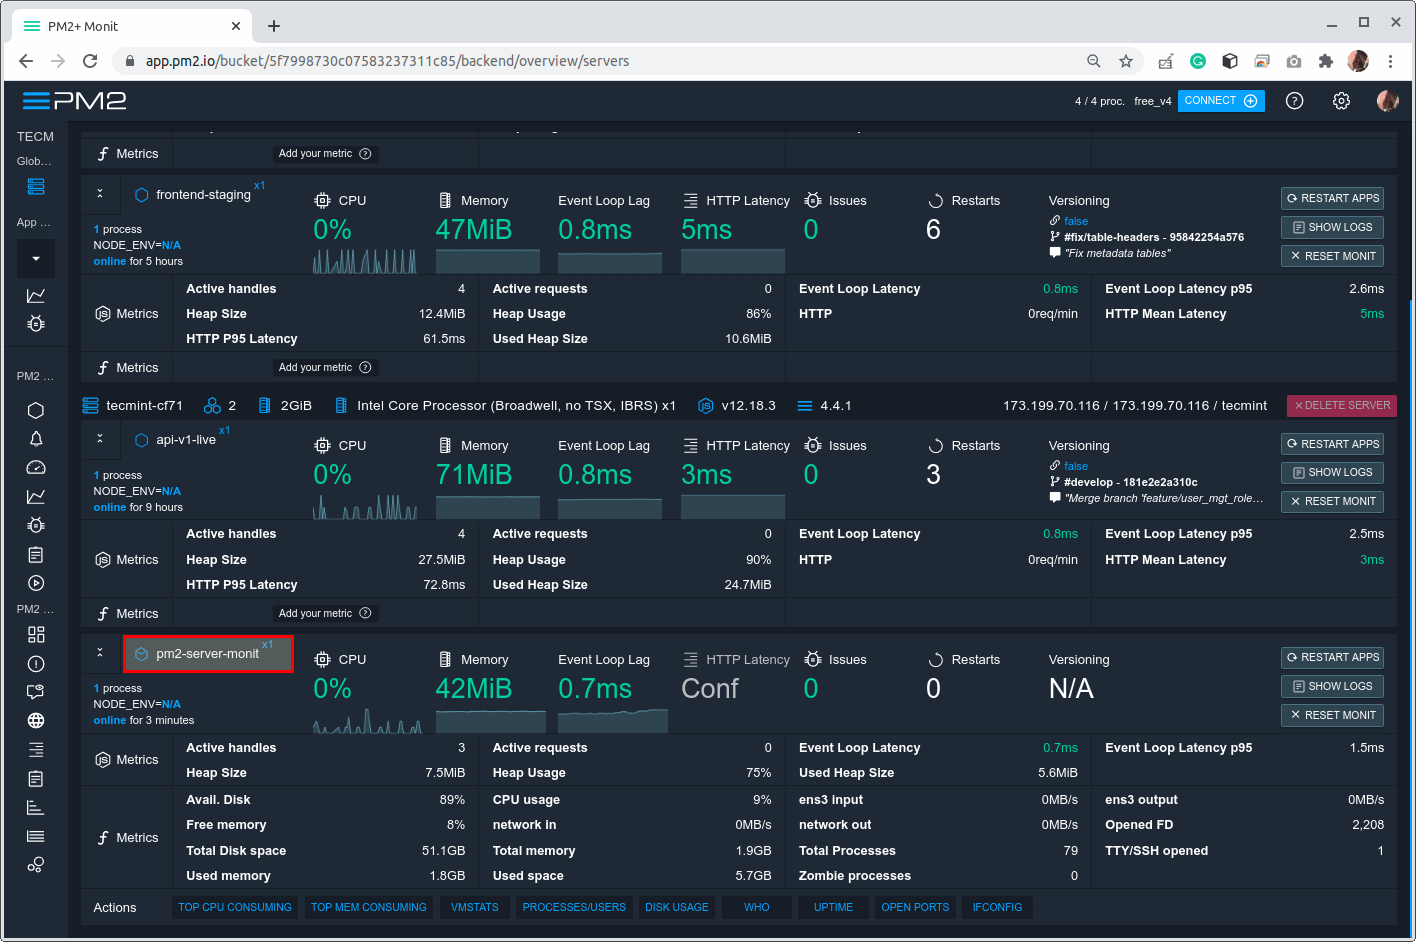 Monitor Server Resources from PM2 Dashboard